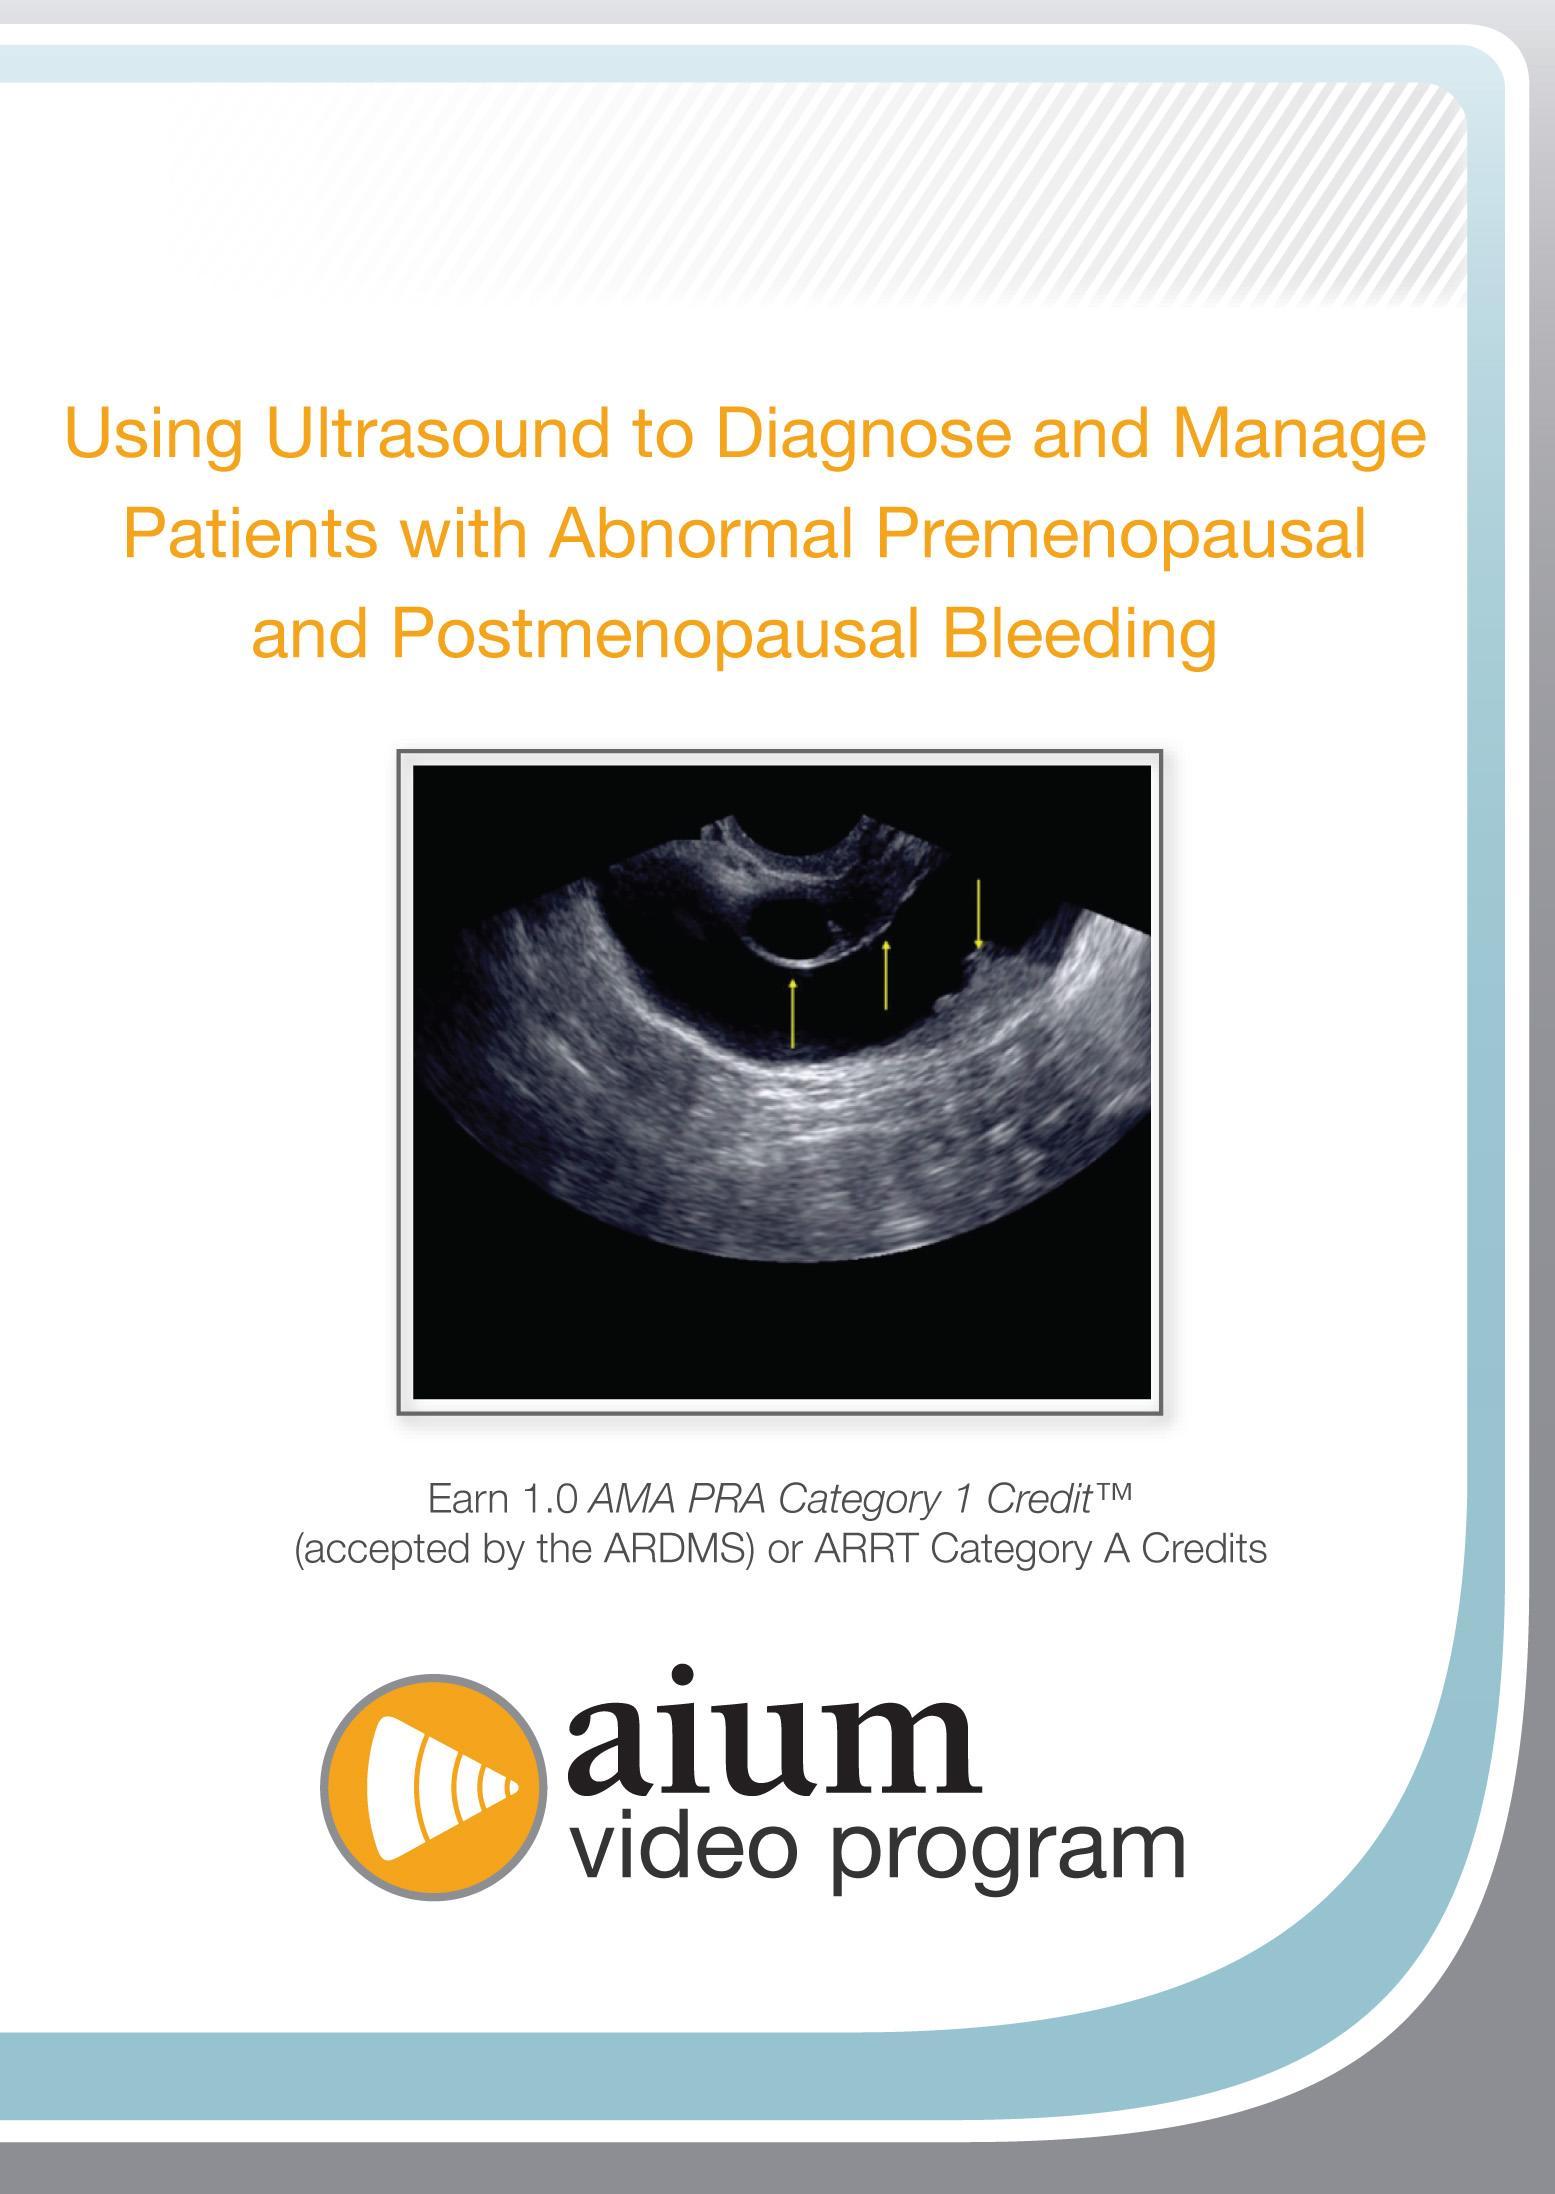 AIUM Using Ultrasound to Diagnose and Manage Patients with Abnormal Premenopausal and Postmenopausal Bleeding - Medical Videos | Board Review Courses